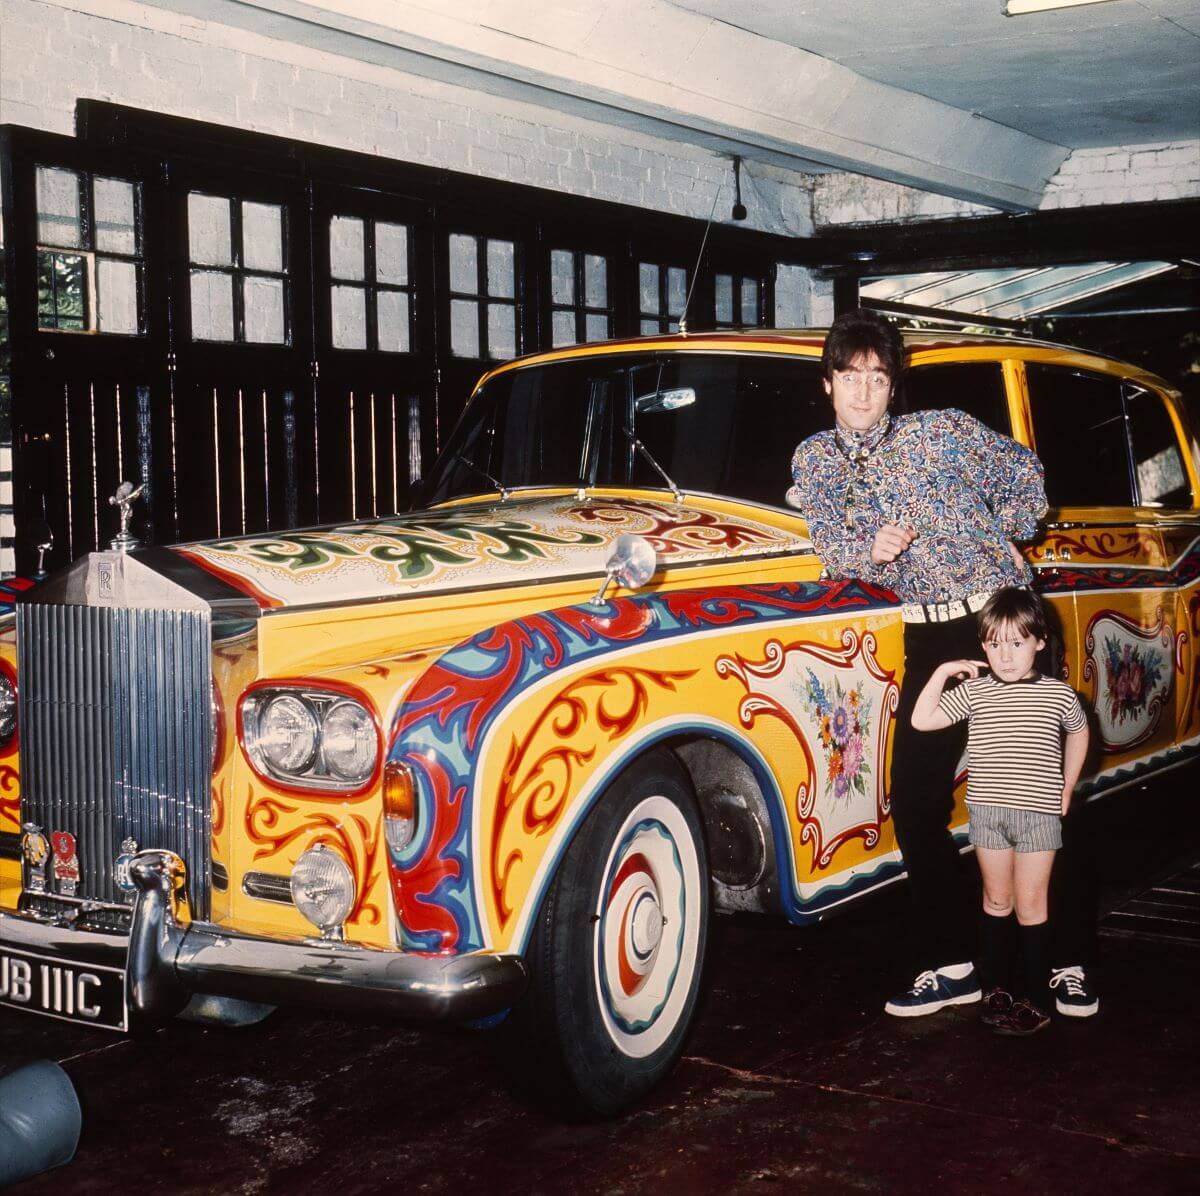 You are currently viewing A Stranger Called John Lennon a Swine for the Way He Painted His Car: ‘Like Putting Graffiti on Buckingham Palace’